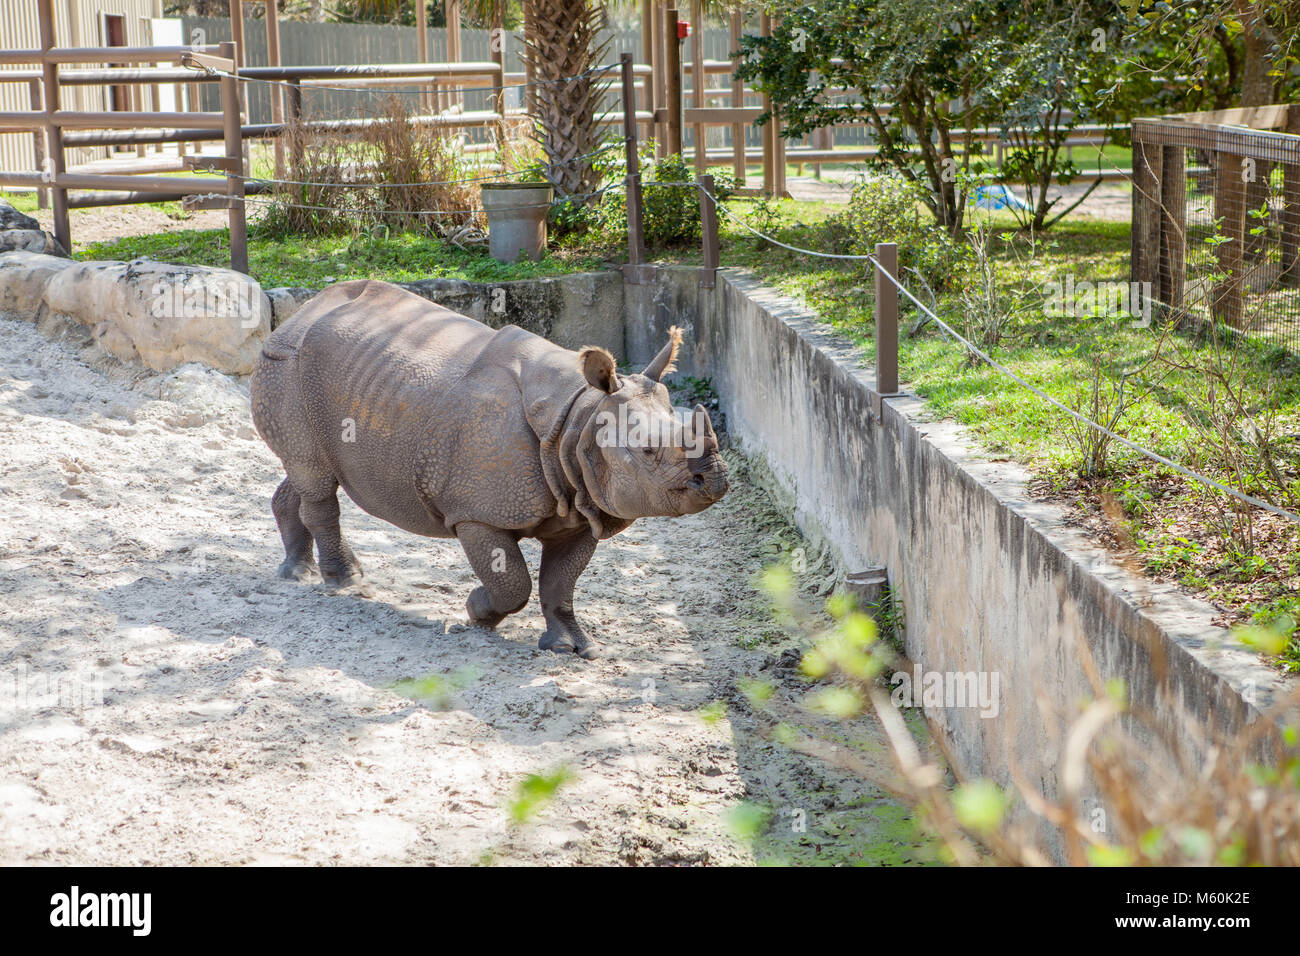 Indian Rhino At The Central Florida Zoo And Botanical Gardens